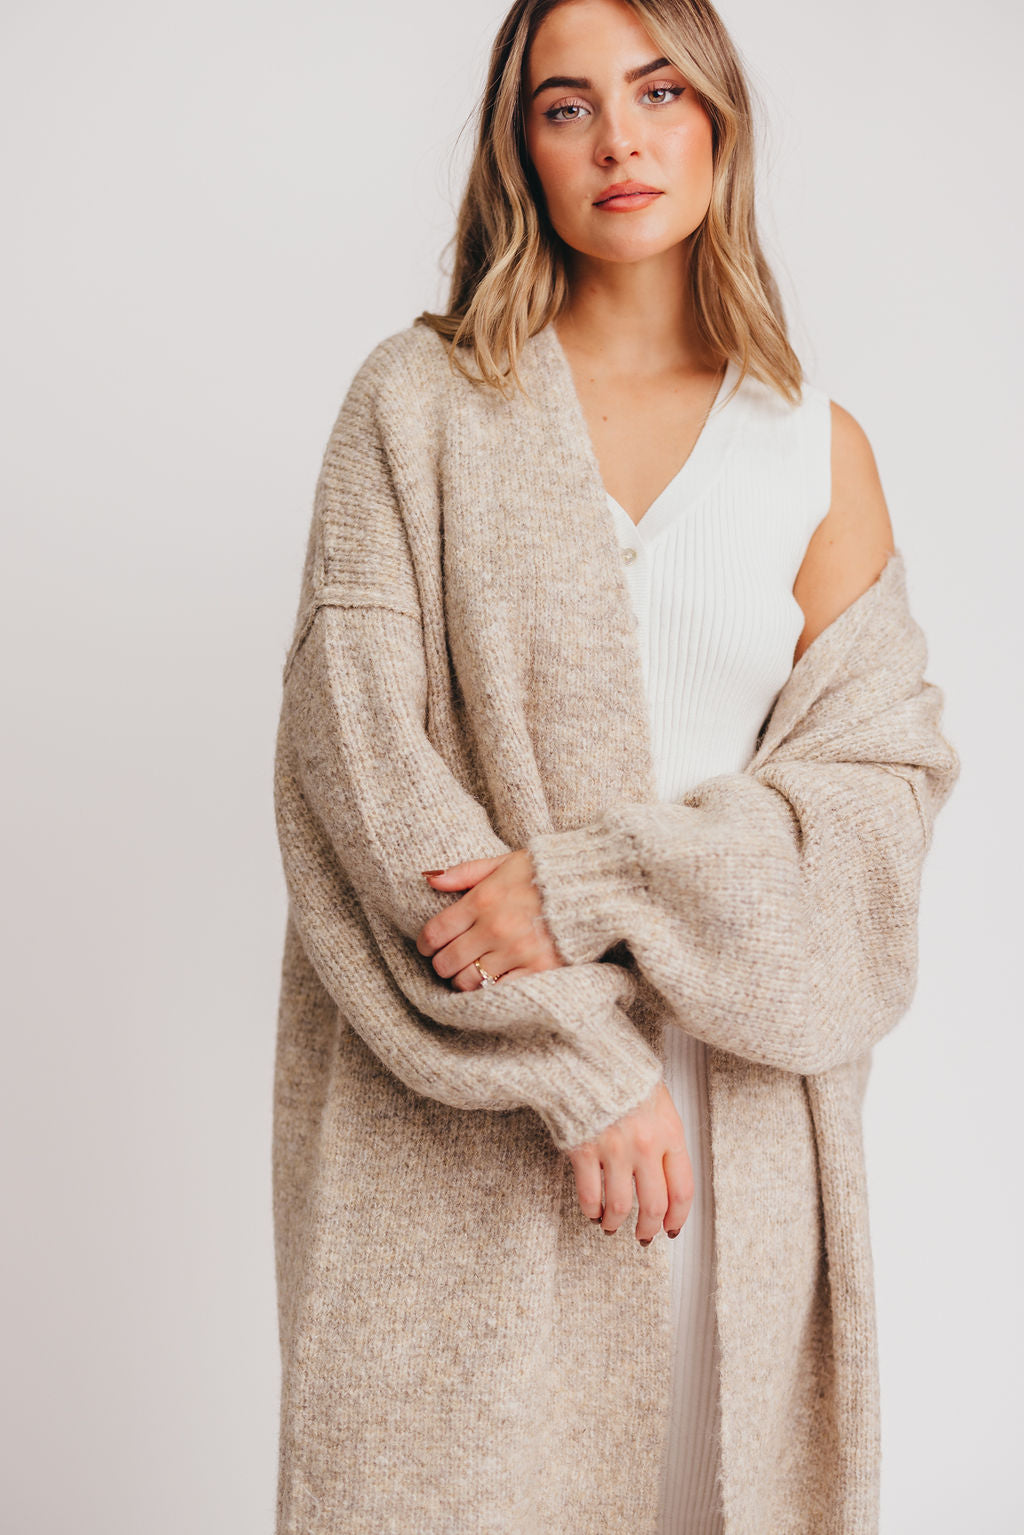 – Oversized Edge Worth in Amelia Oatmeal Collective Cardigan Rolled